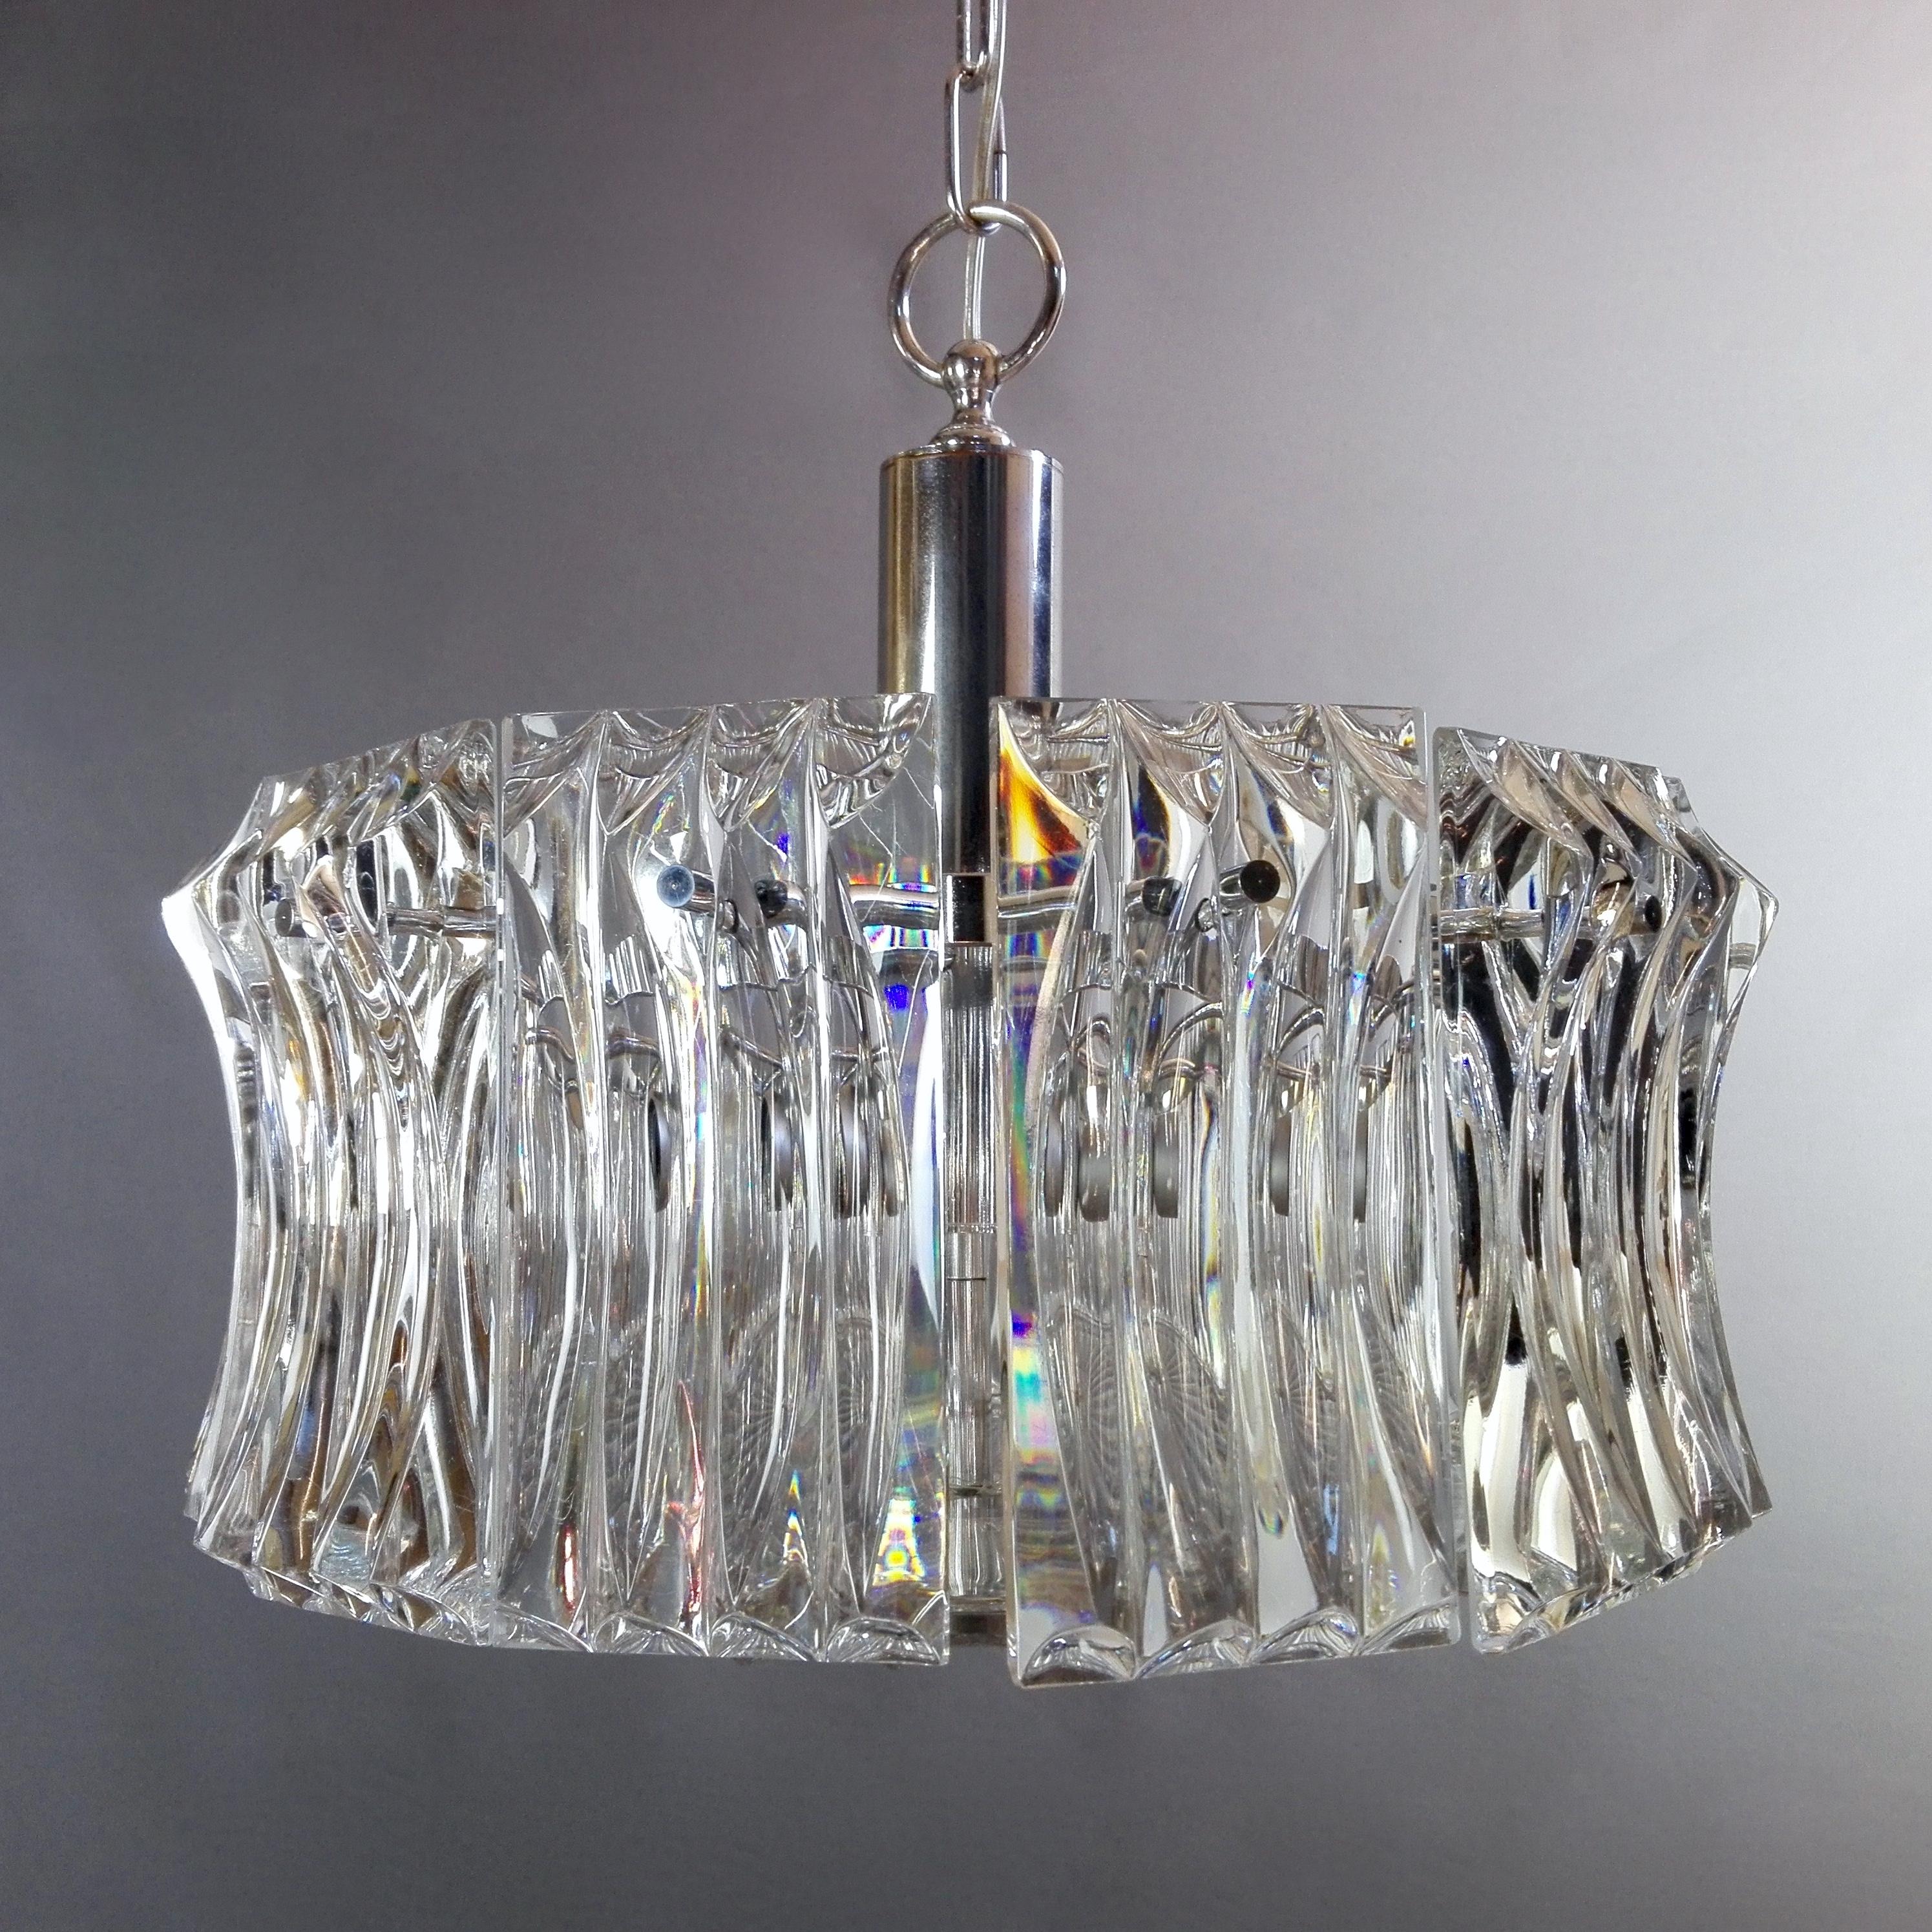 Mid-Century Modern 1960s Paolo Venini attributable Murano Glass and Chrome Three-Light Chandelier For Sale